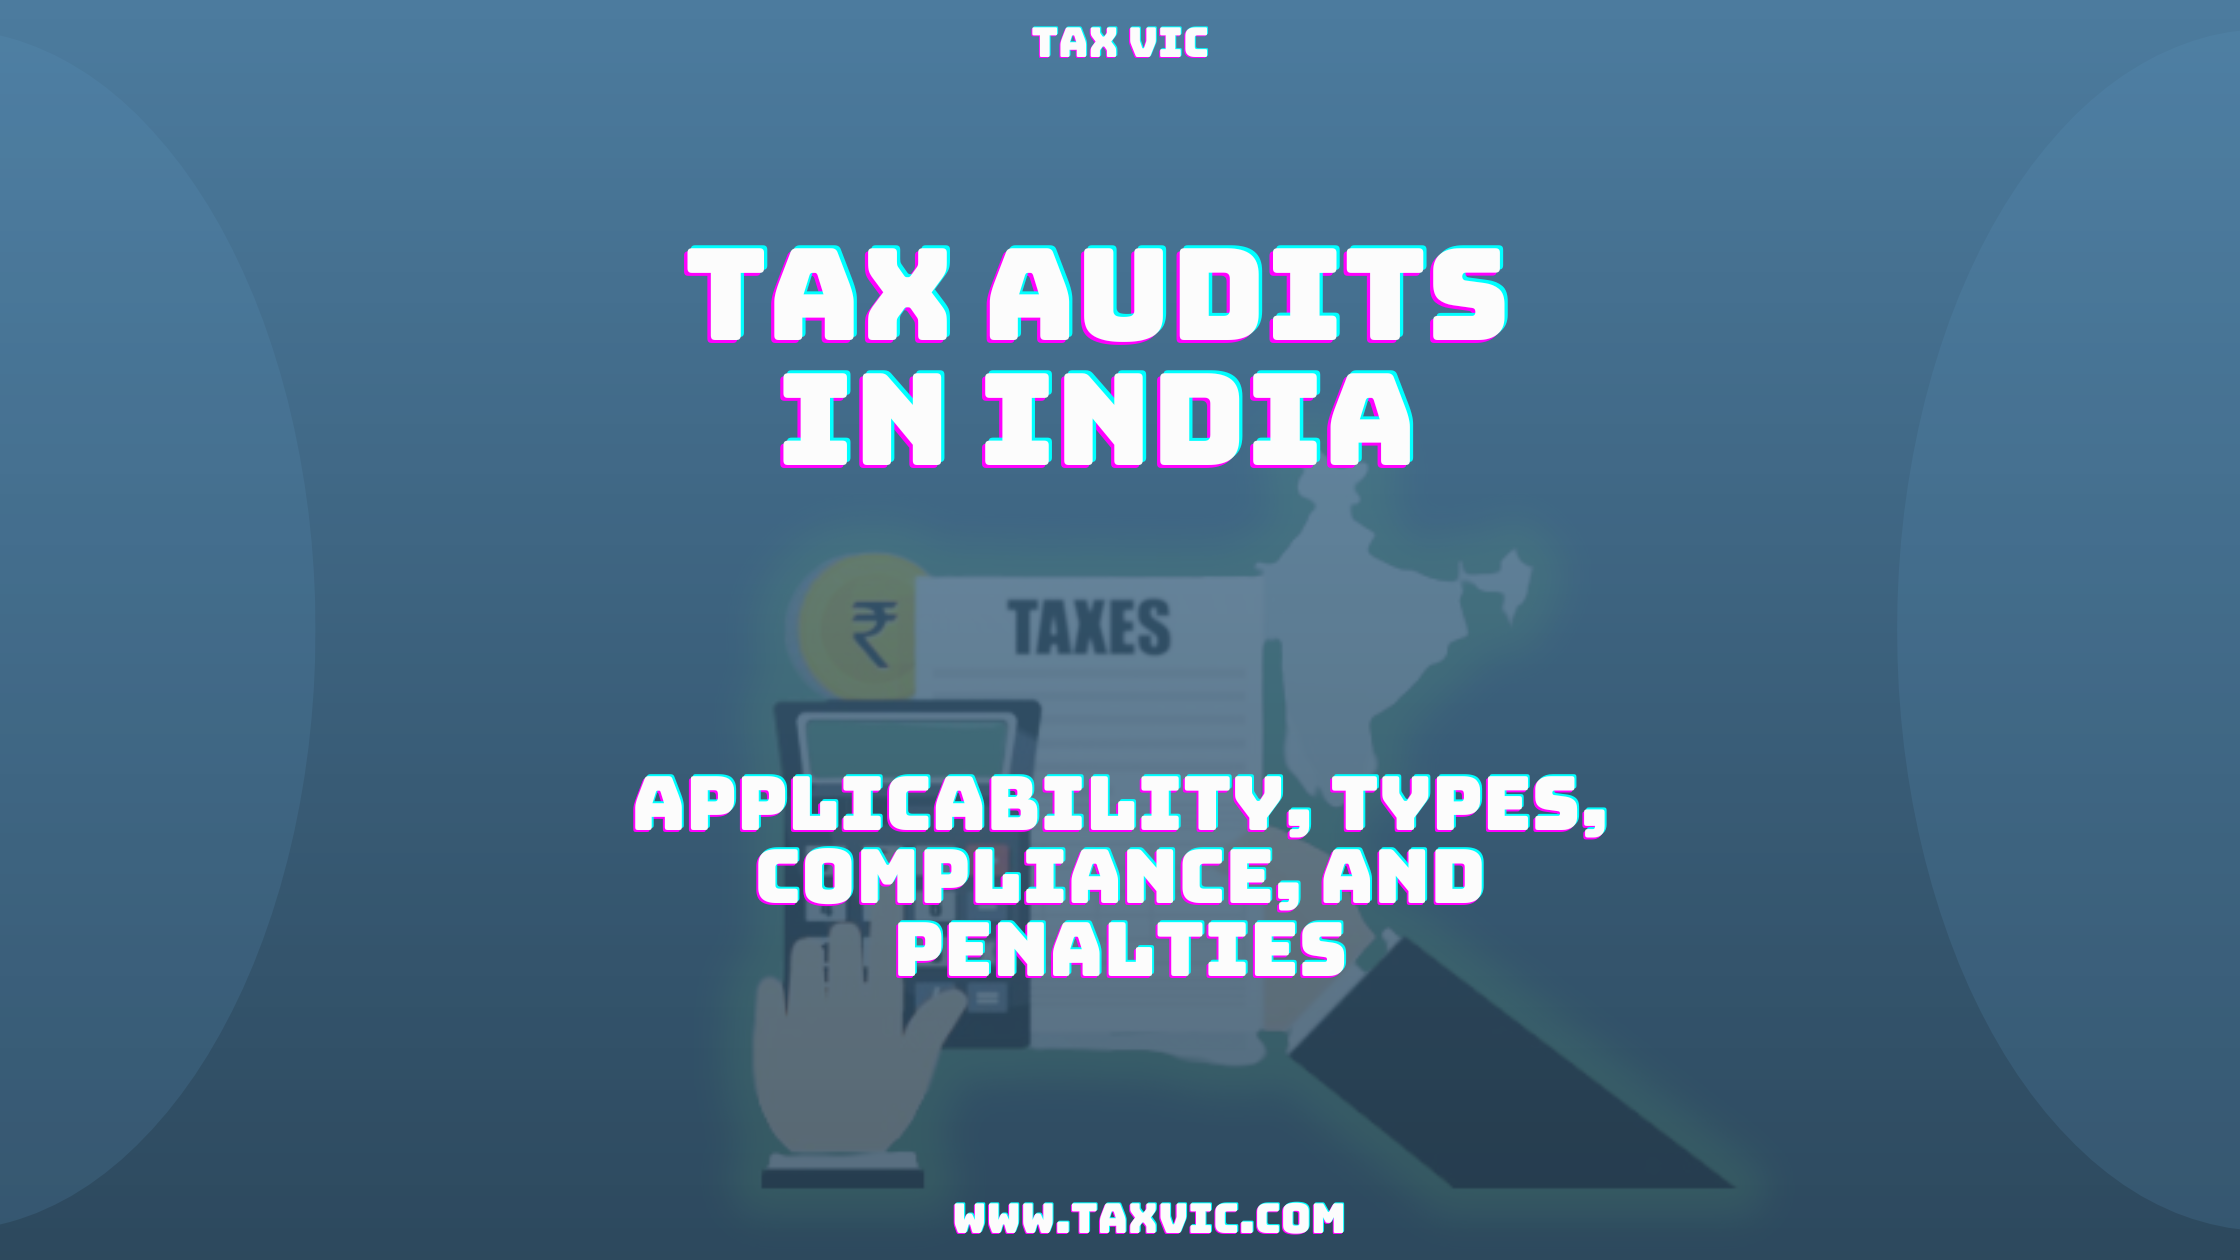 insights into tax audits in India, their objectives, applicability, types, and filing requirements. Understand the importance of compliance